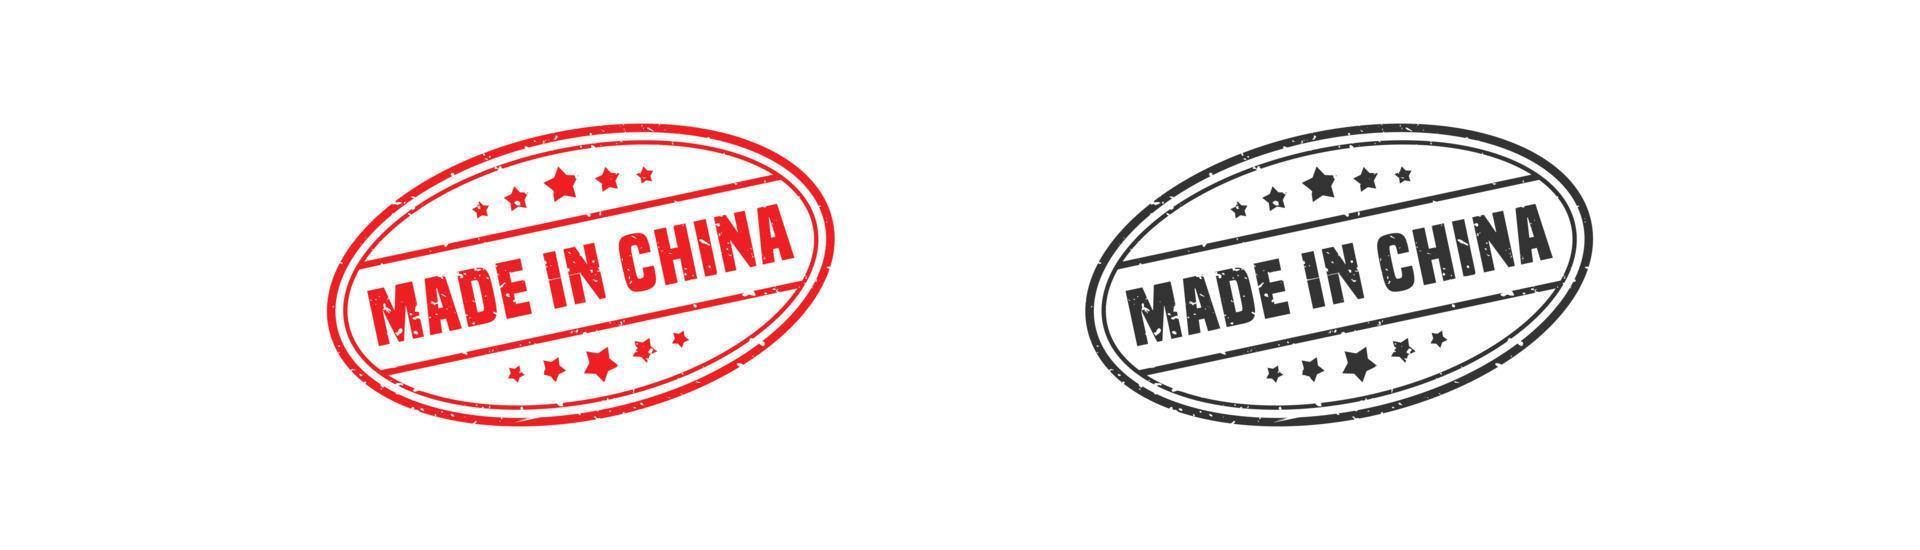 Made in china stamp rubber with grunge style on white background. vector